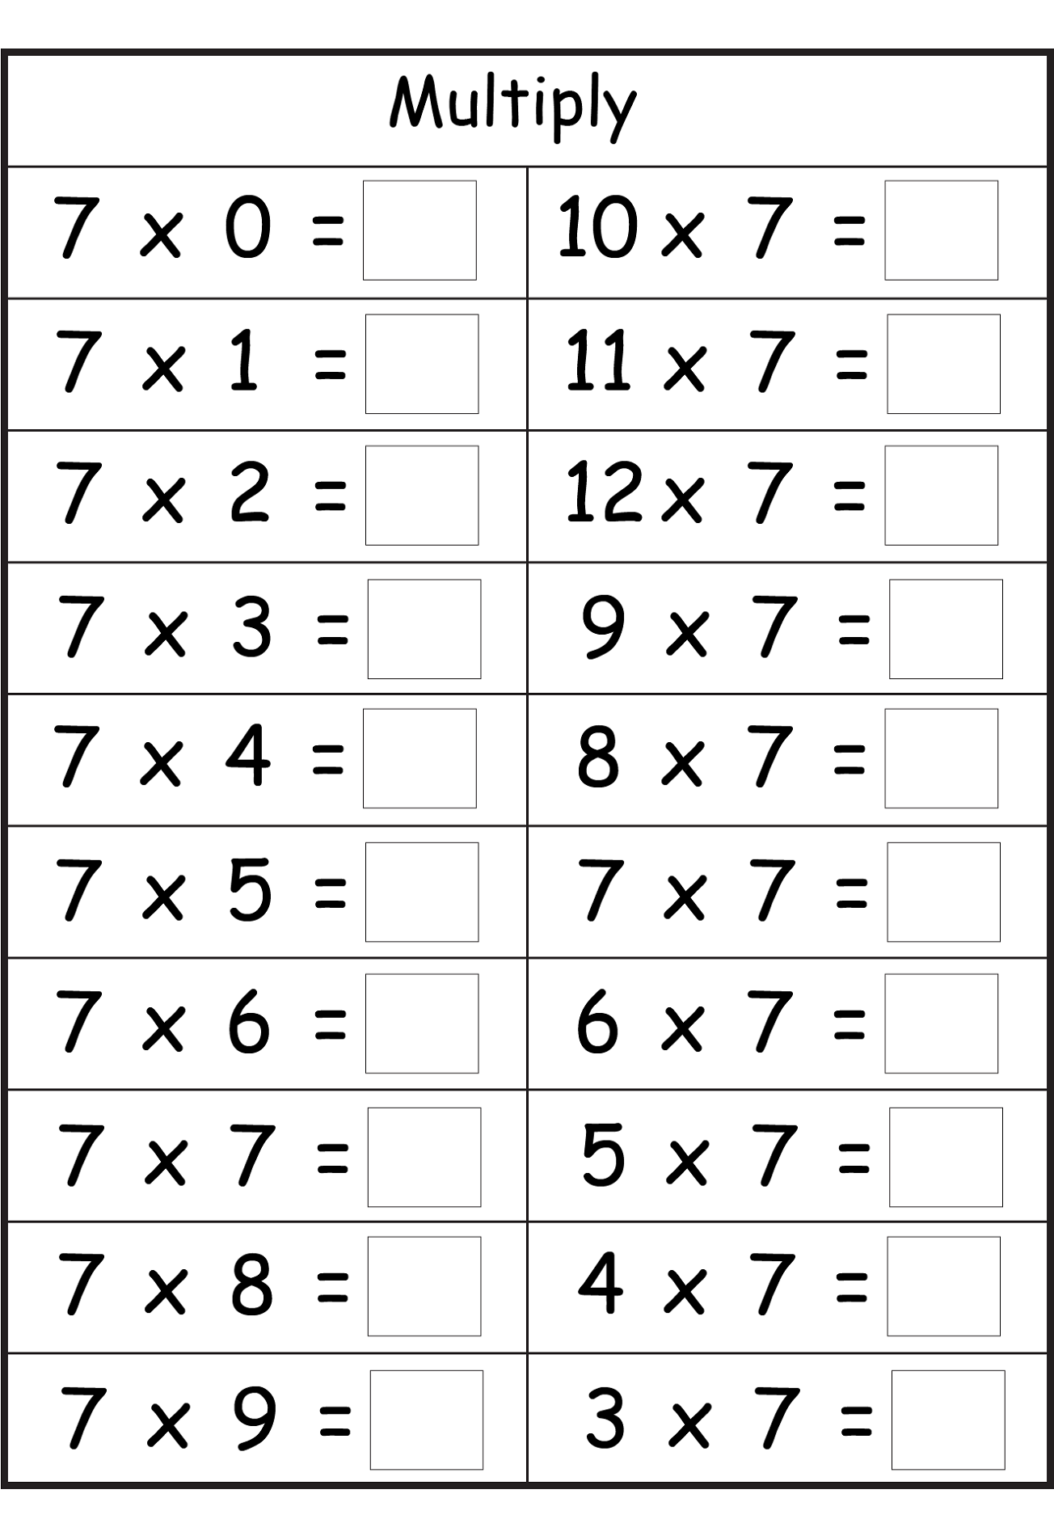 Free Printable Multiplication Table Of 7 Charts 